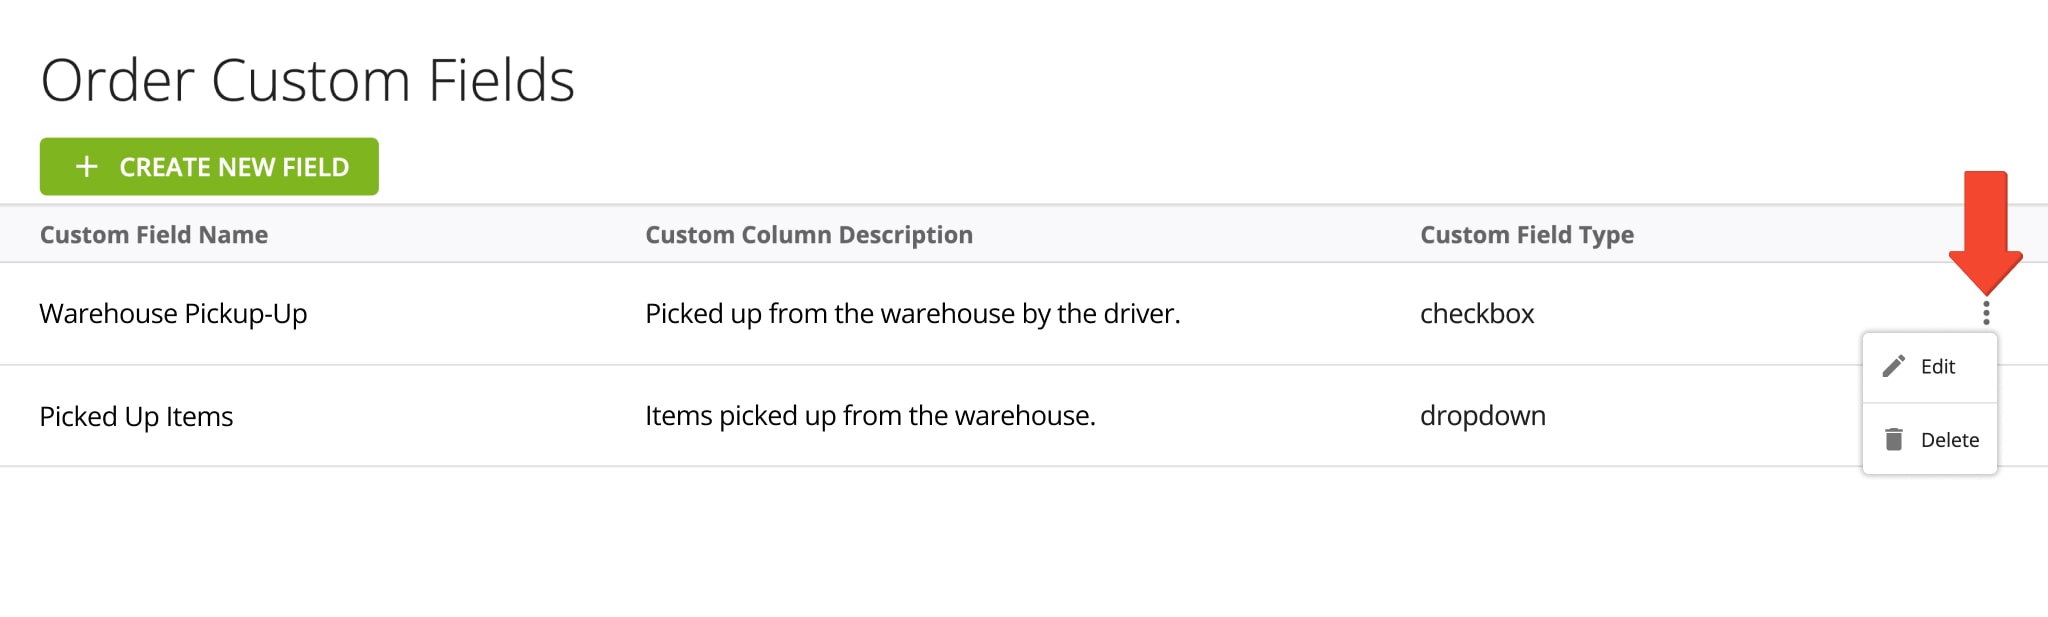 Once you have created one or multiple new status fields, you can use the Custom Order Fields Editor to view, delete, and edit all of your existing Custom Order Fields and statuses.